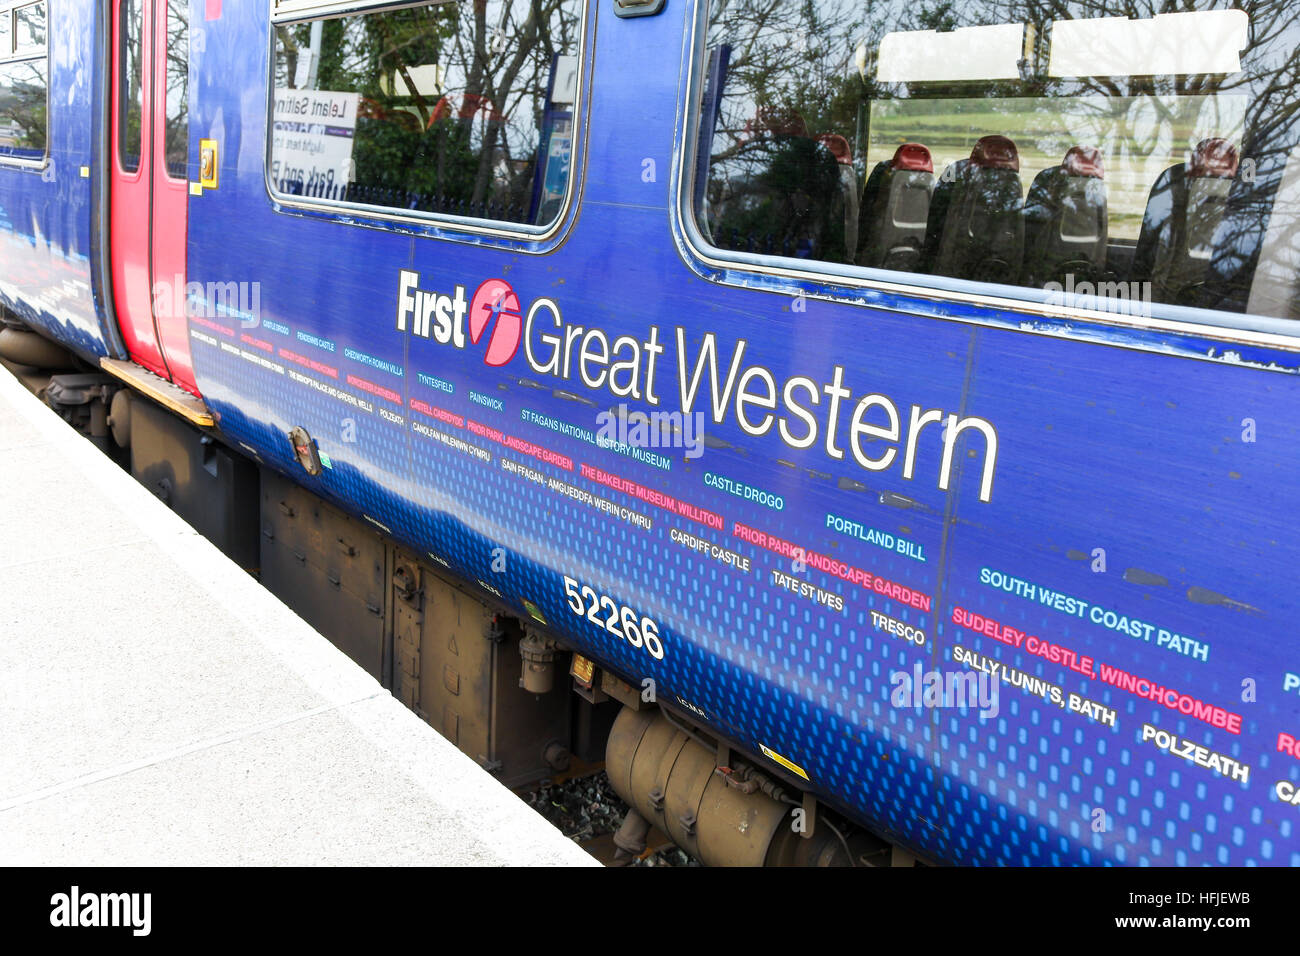 A First Great Western railway train coach or train carriage Stock Photo